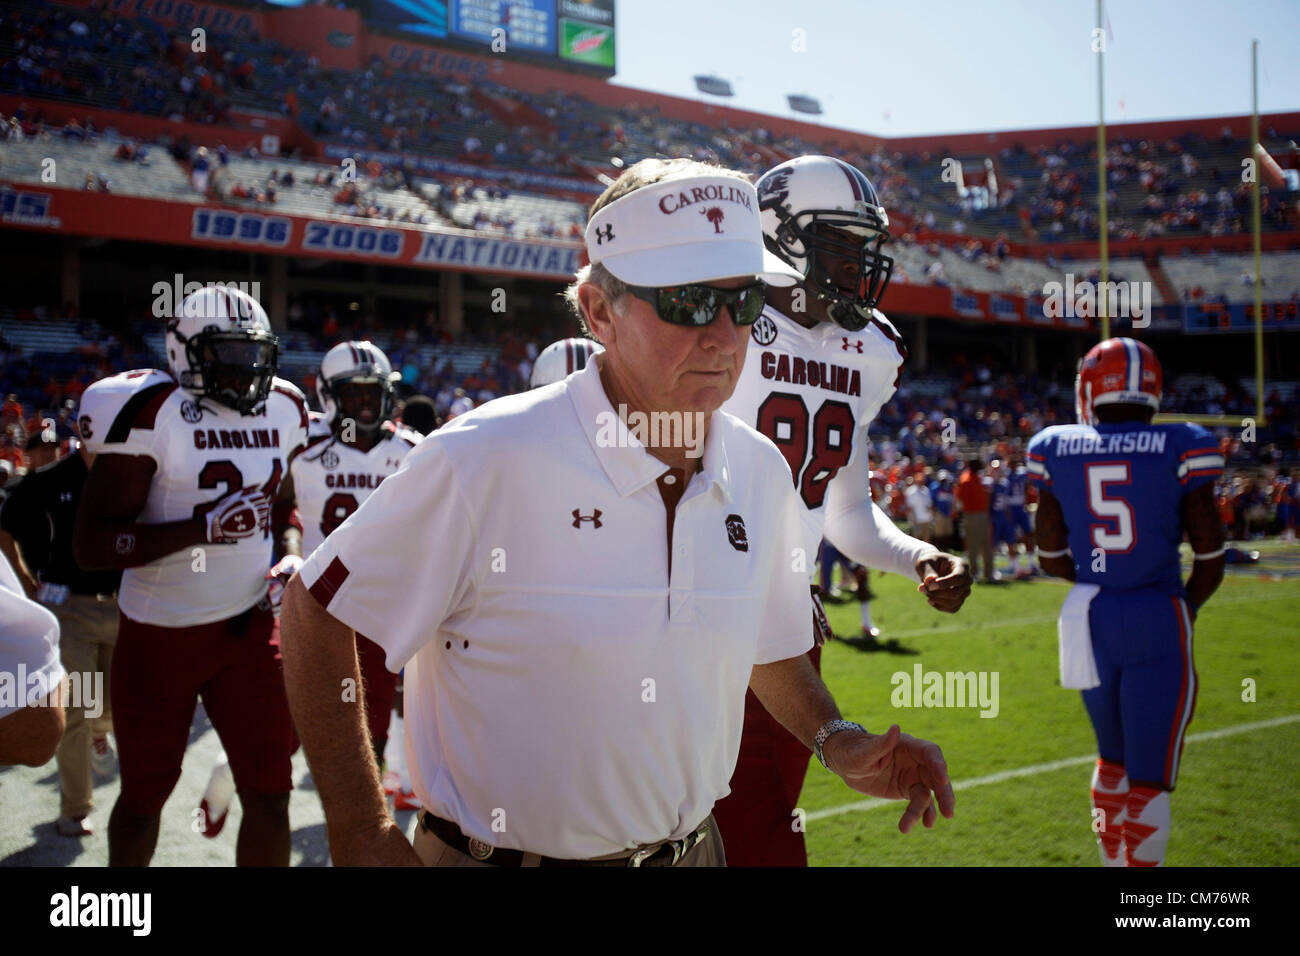 Oct. 20, 2012 - Florida, U.S. - WILL VRAGOVIC | Times.ot 360417 vrag gators 03 of (10/20/12 Gainesville, Fla.) South Carolina Gamecocks head coach Steve Spurrier makes his way onto the field for warmups before the South Carolina Gamecocks at the Florida Gators football game at Ben Hill Griffin Stadium in Gainesville, Fla. on Saturday, Oct. 20. (Credit Image: © Will Vragovic/Tampa Bay Times/ZUMAPRESS.com) Stock Photo